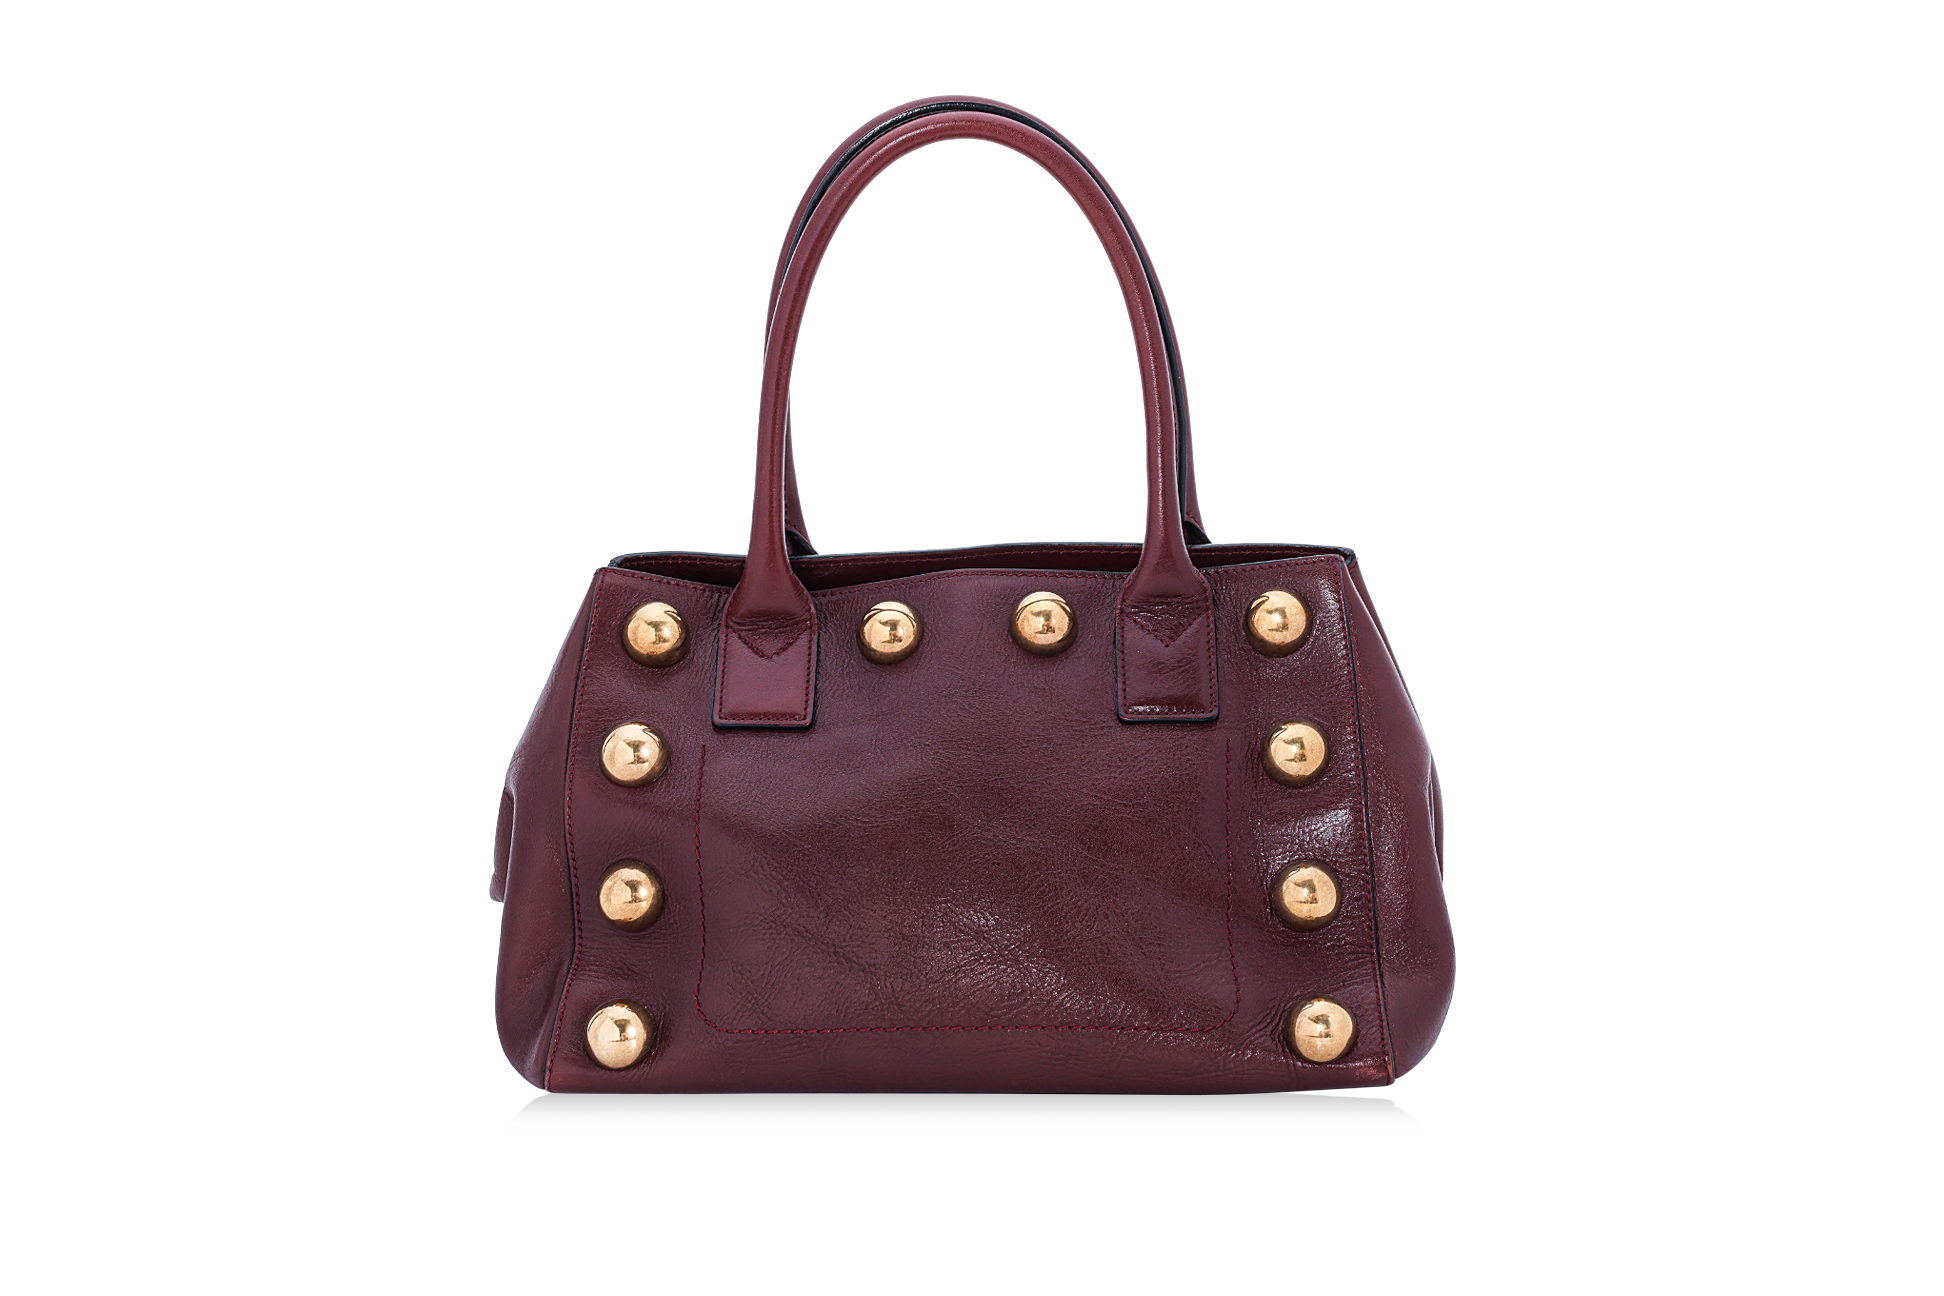 A MARC JACOBS BURGUNDY LEATHER BAG WITH GOLD STUD ACCENTS - Image 2 of 2